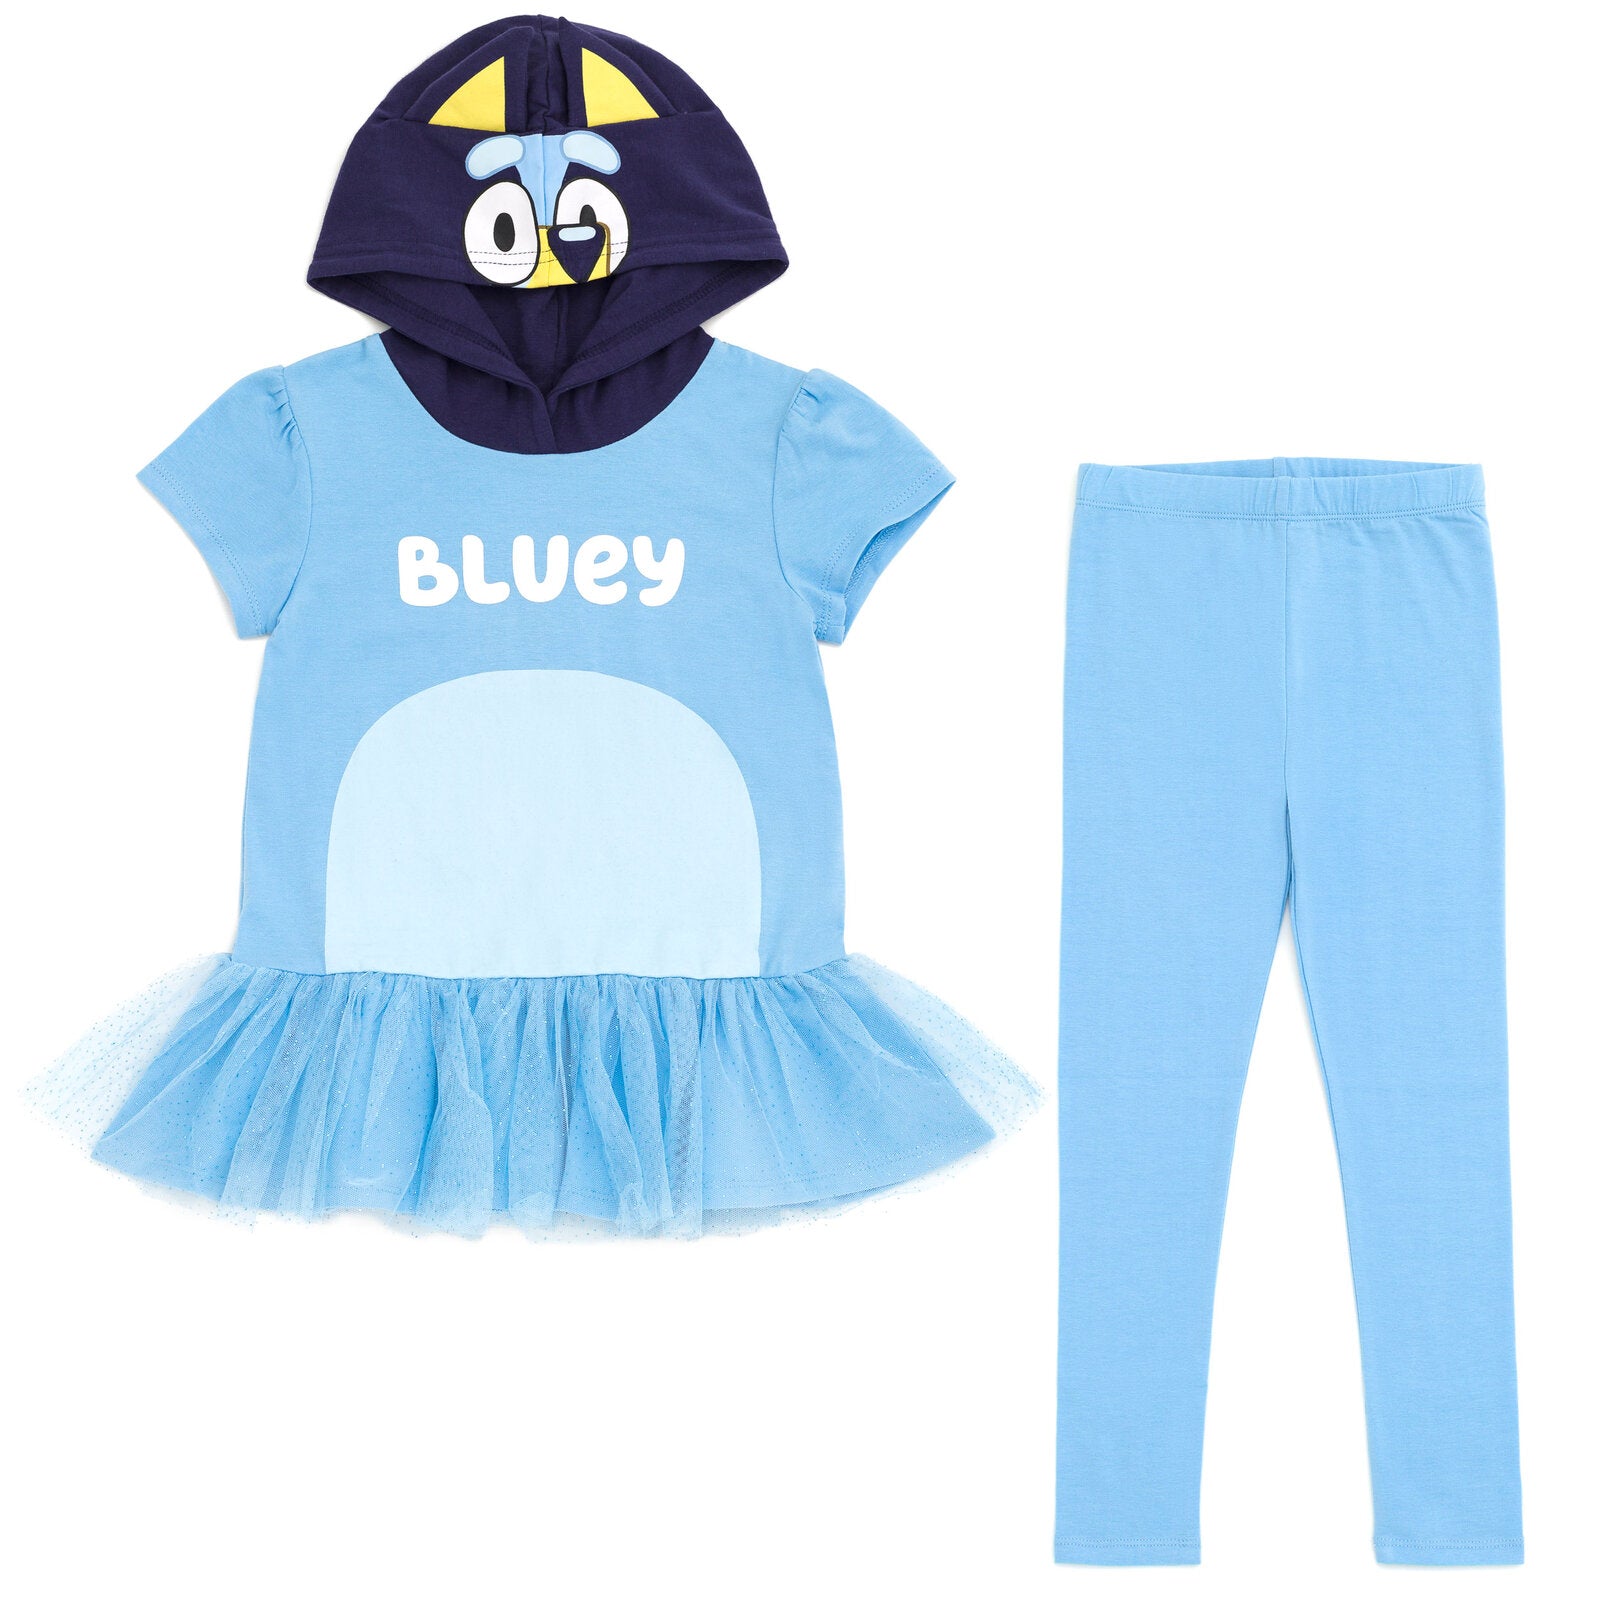 Bluey Bingo Little Boys Cosplay T-Shirt and Mesh Shorts Outfit Set